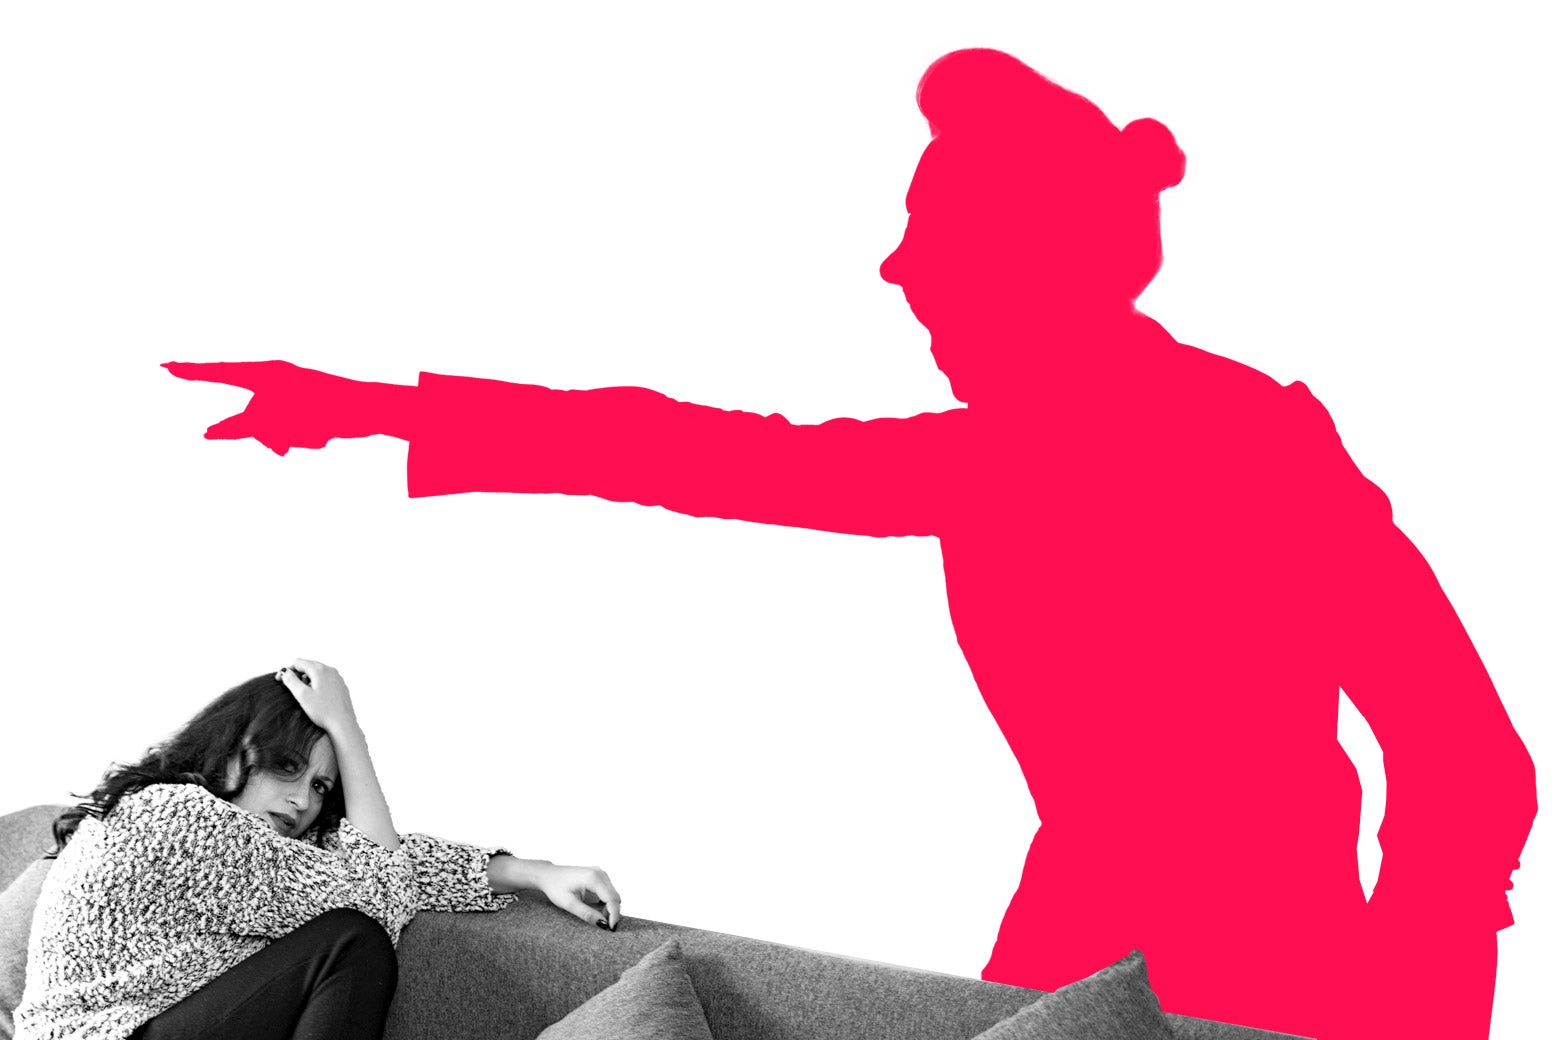 A woman cowering on a couch with the silhouette of an older woman shouting.